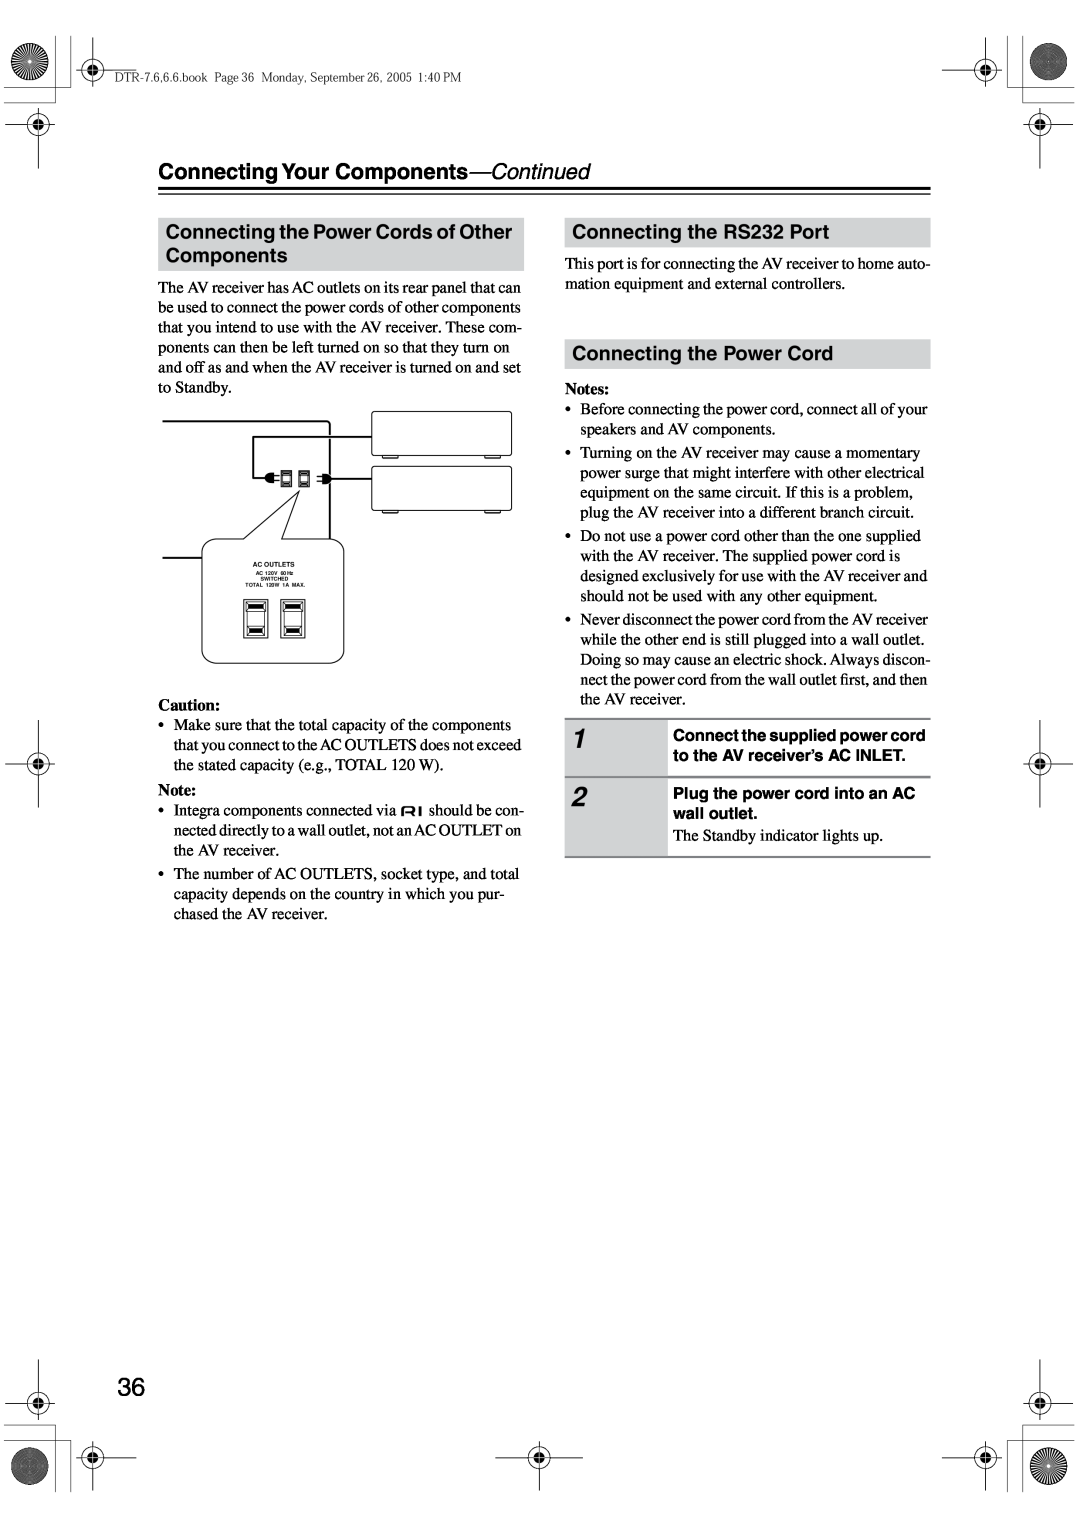 Integra DTR-7.6/6.6 instruction manual Connecting the Power Cords of Other Components, Connecting the RS232 Port, Notes 